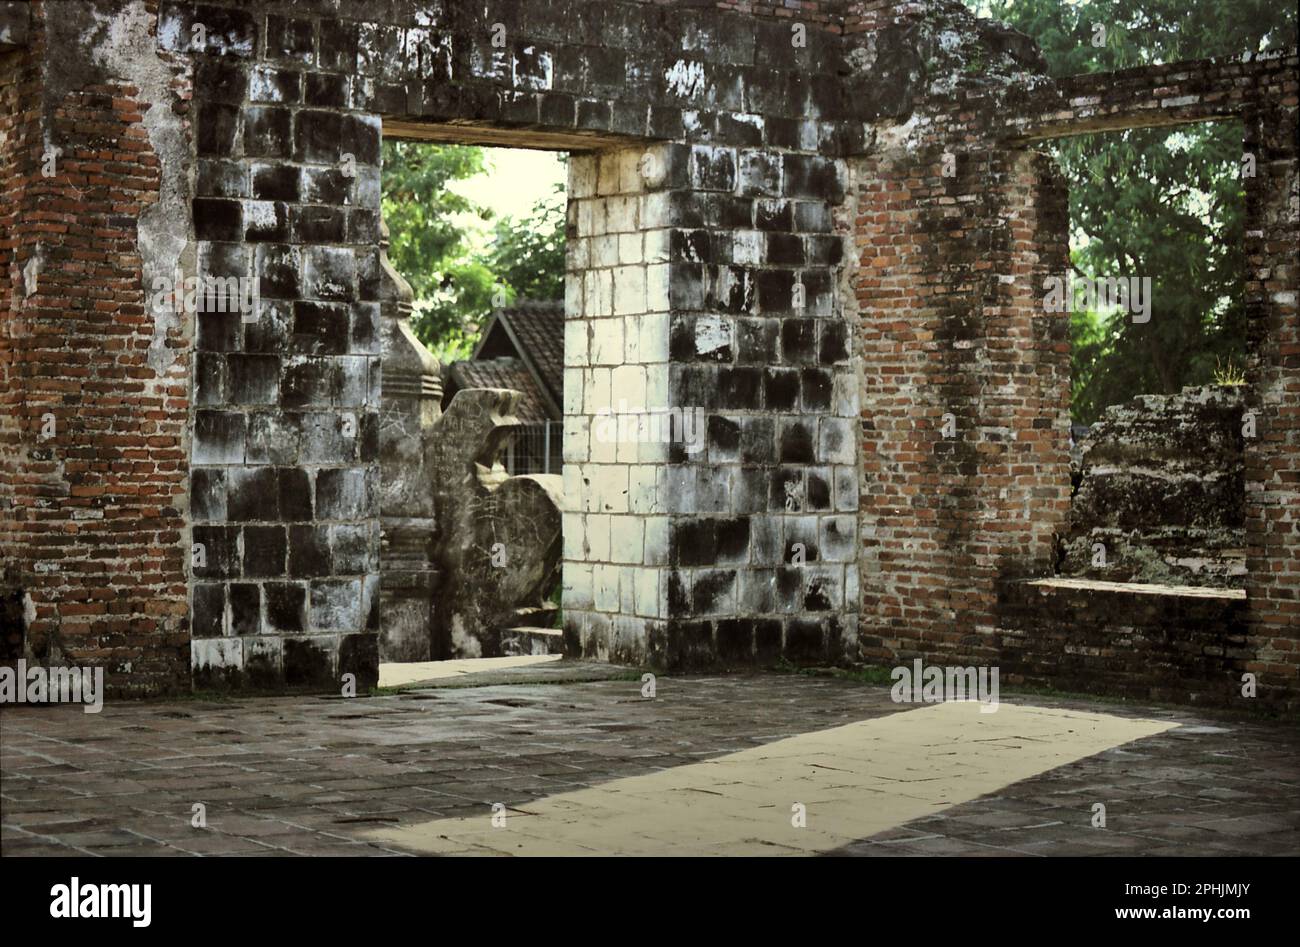 A corner at the remaining of Kaibon palace, one of the cultural heritage objects from Banten Sultanate period located in area now called Banten Lama (Old Banten) in Serang, Banten, Indonesia. 'The sustainability of cultural heritage is strongly linked to the effective participation of local communities in the conservation and management of these resources,' according to a team of scientists led by Sunday Oladipo Oladeji in their research article published on Sage Journals on October 28, 2022. Banten Lama (Old Banten) area was a part of the important port of Banten Sultanate. Stock Photo